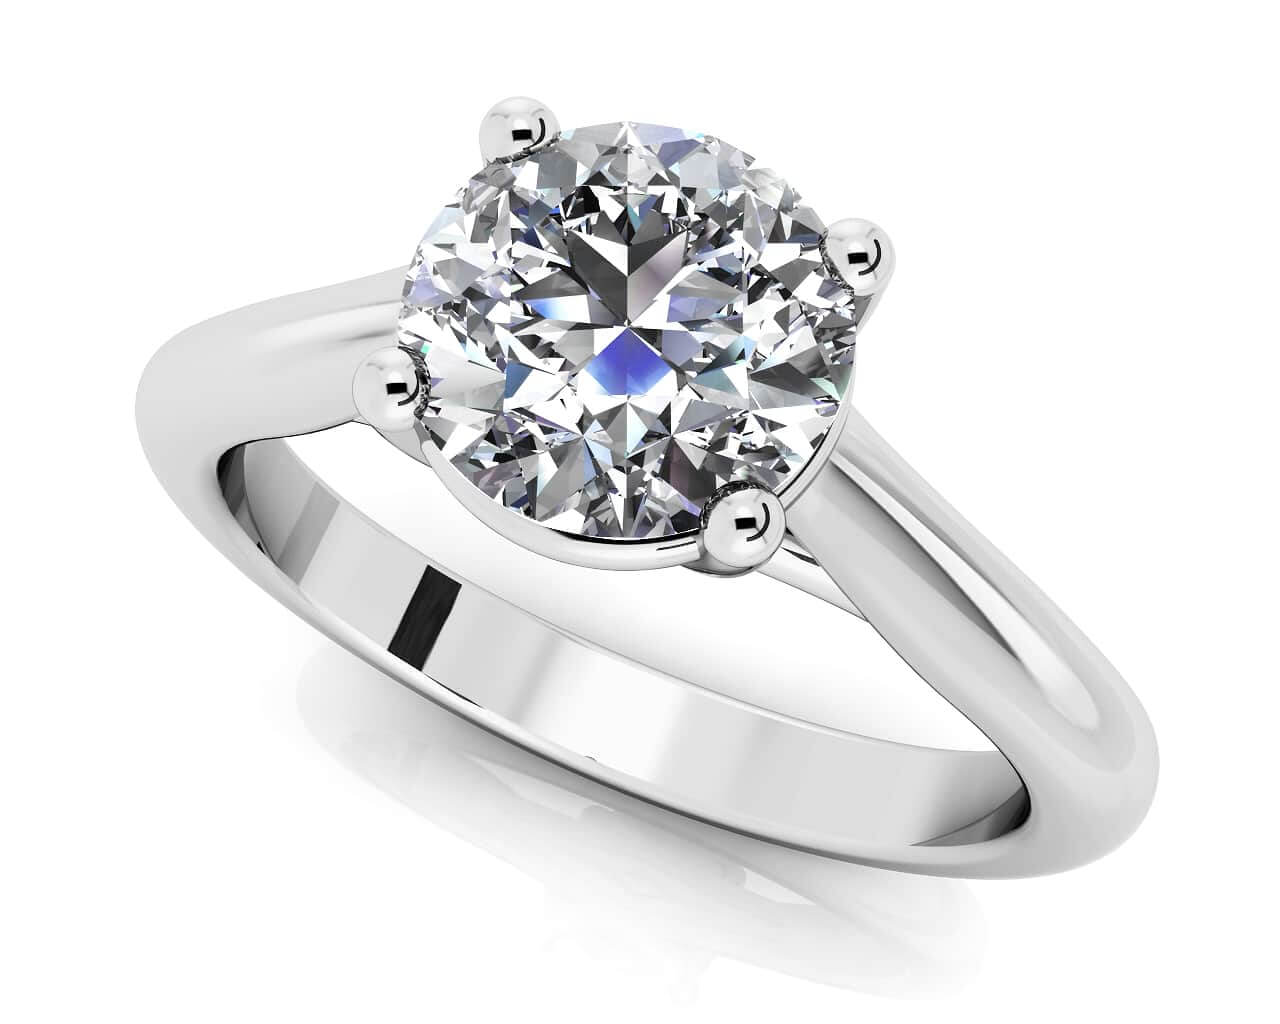 Round Brilliant Cut Diamond Solitaire Ring 1/2 Carat Total Weight